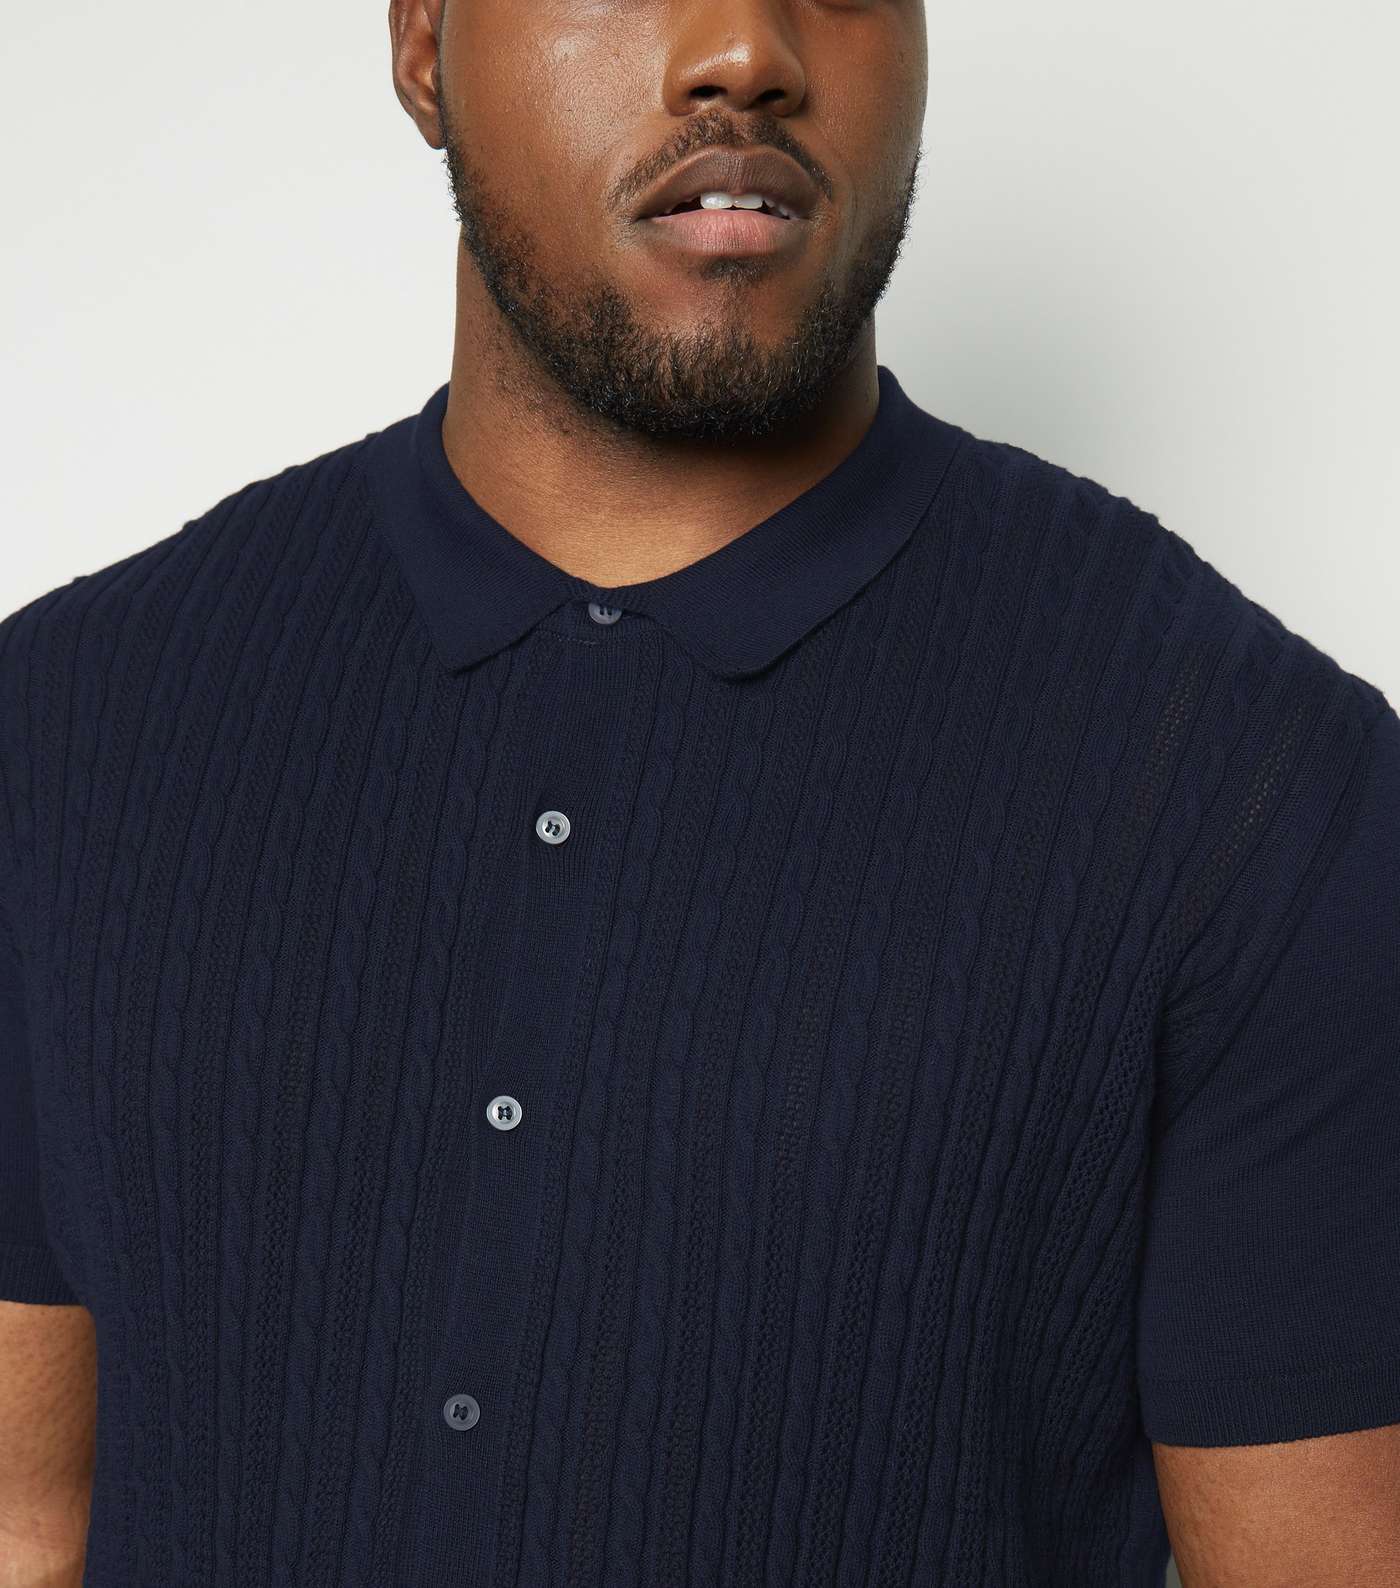 Plus Size Navy Cable Knit Polo Shirt Image 5